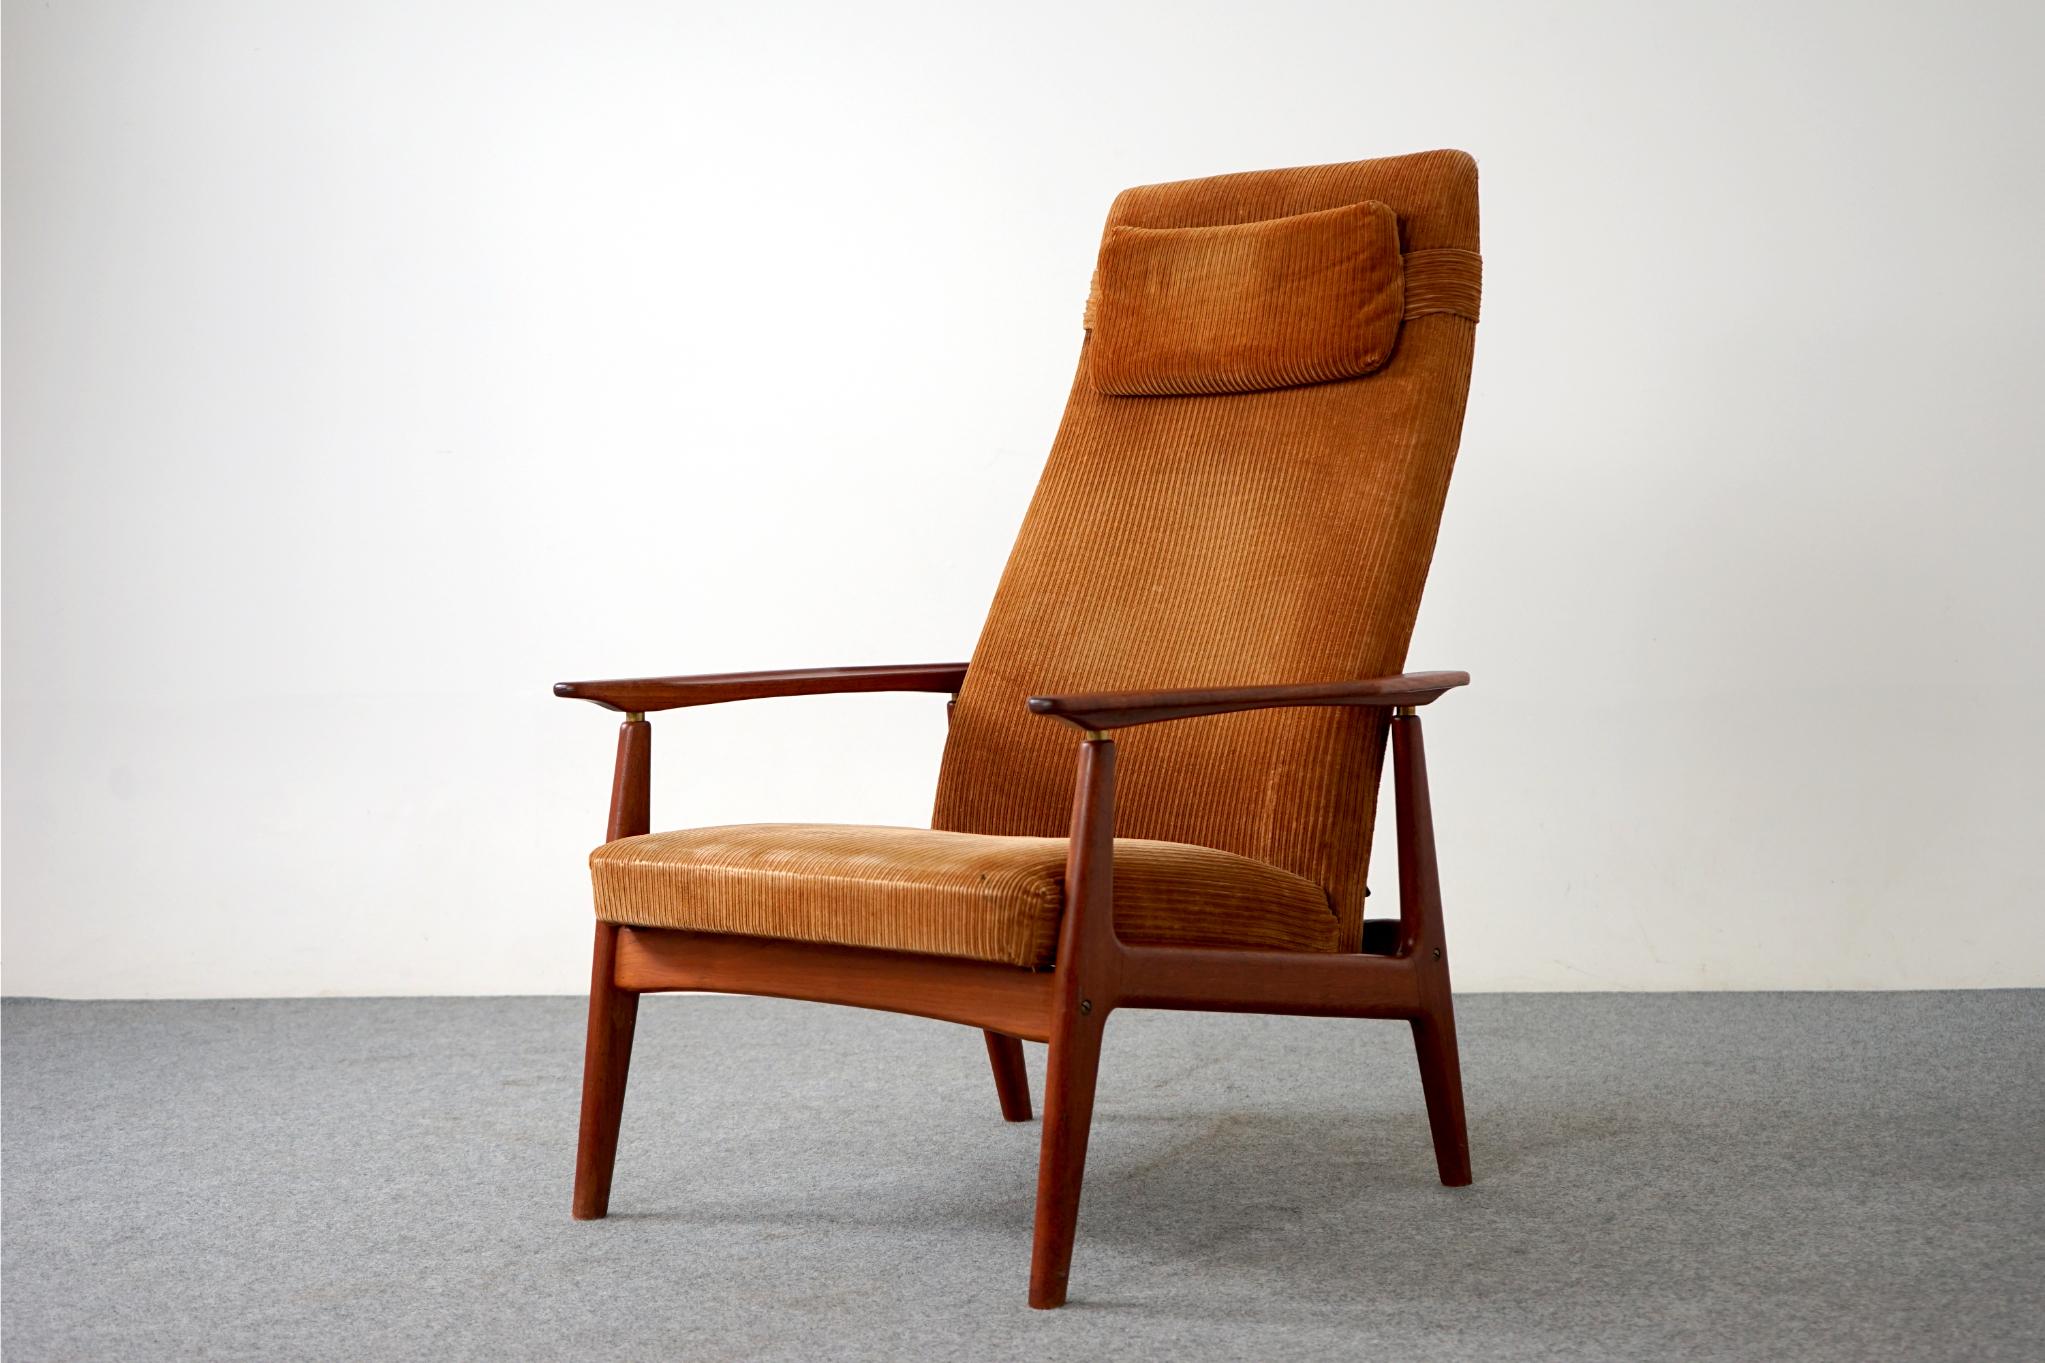 Rosewood Danish modern lounge chair, circa 1960's. High back on lounge chair provides extra support for your neck. Clean modern solid wood frame with loose cushions design is easy to combine with other furniture in your living room.

Wood frame is